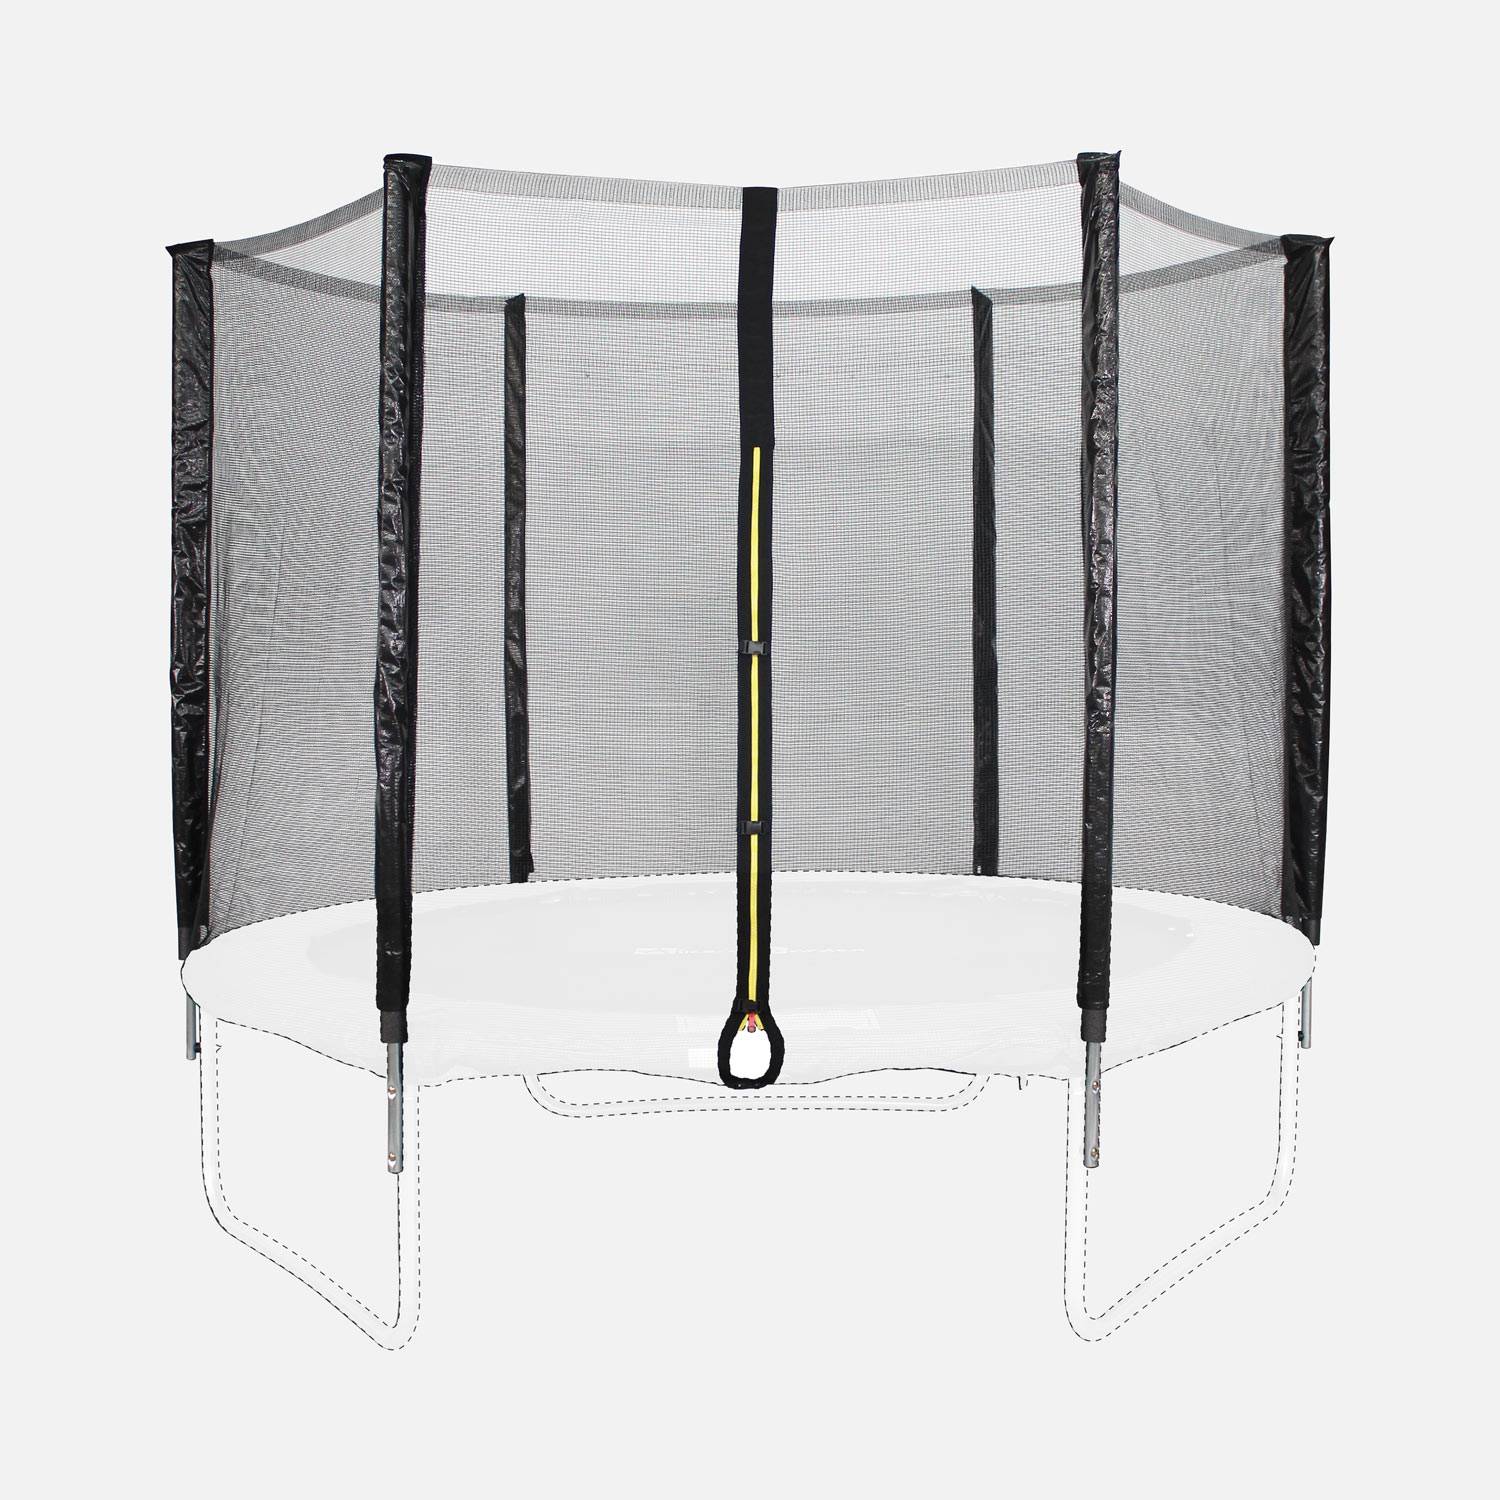 Net replacement kit for trampoline safety - ANTARES OUTER - for Pluton Ø8ft trampolines,sweeek,Photo2